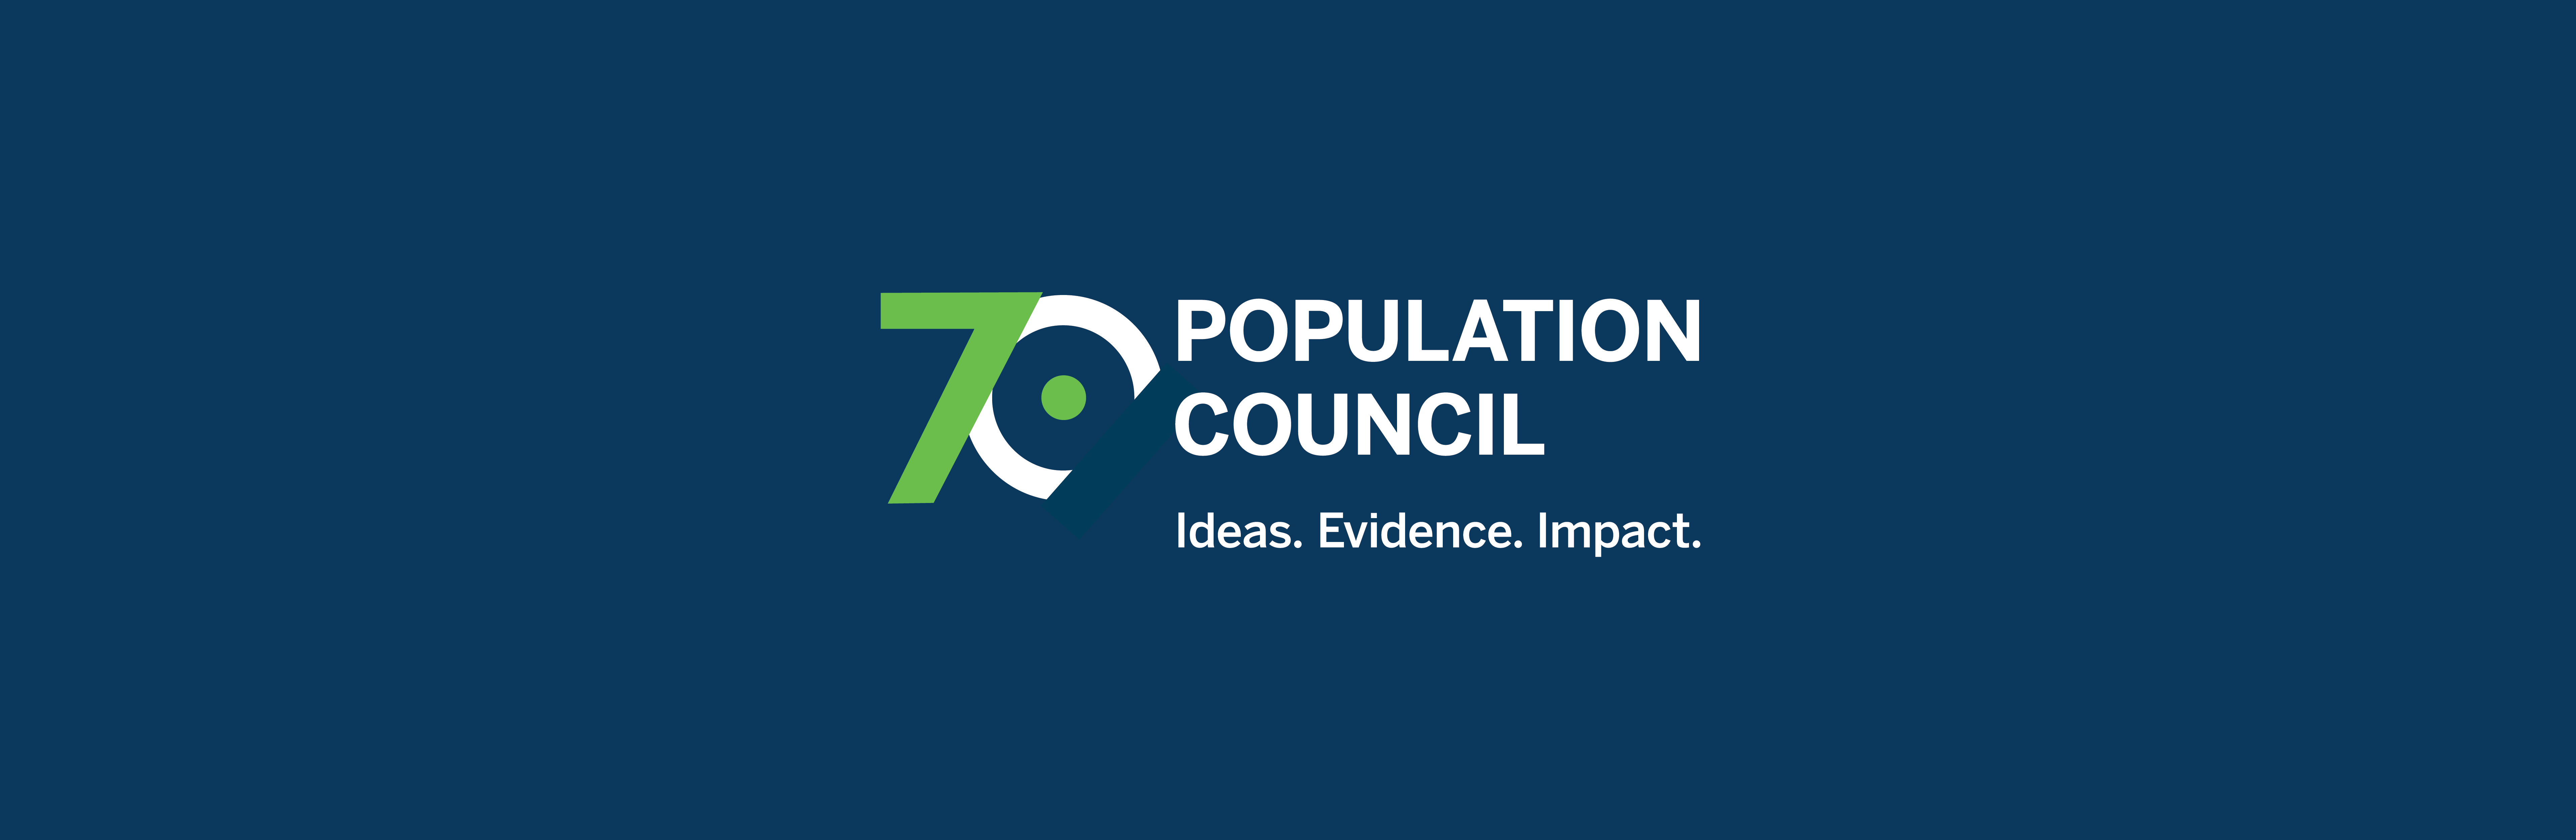 Population Council 70th Anniversary logo Ideas. Evidence. Impact.